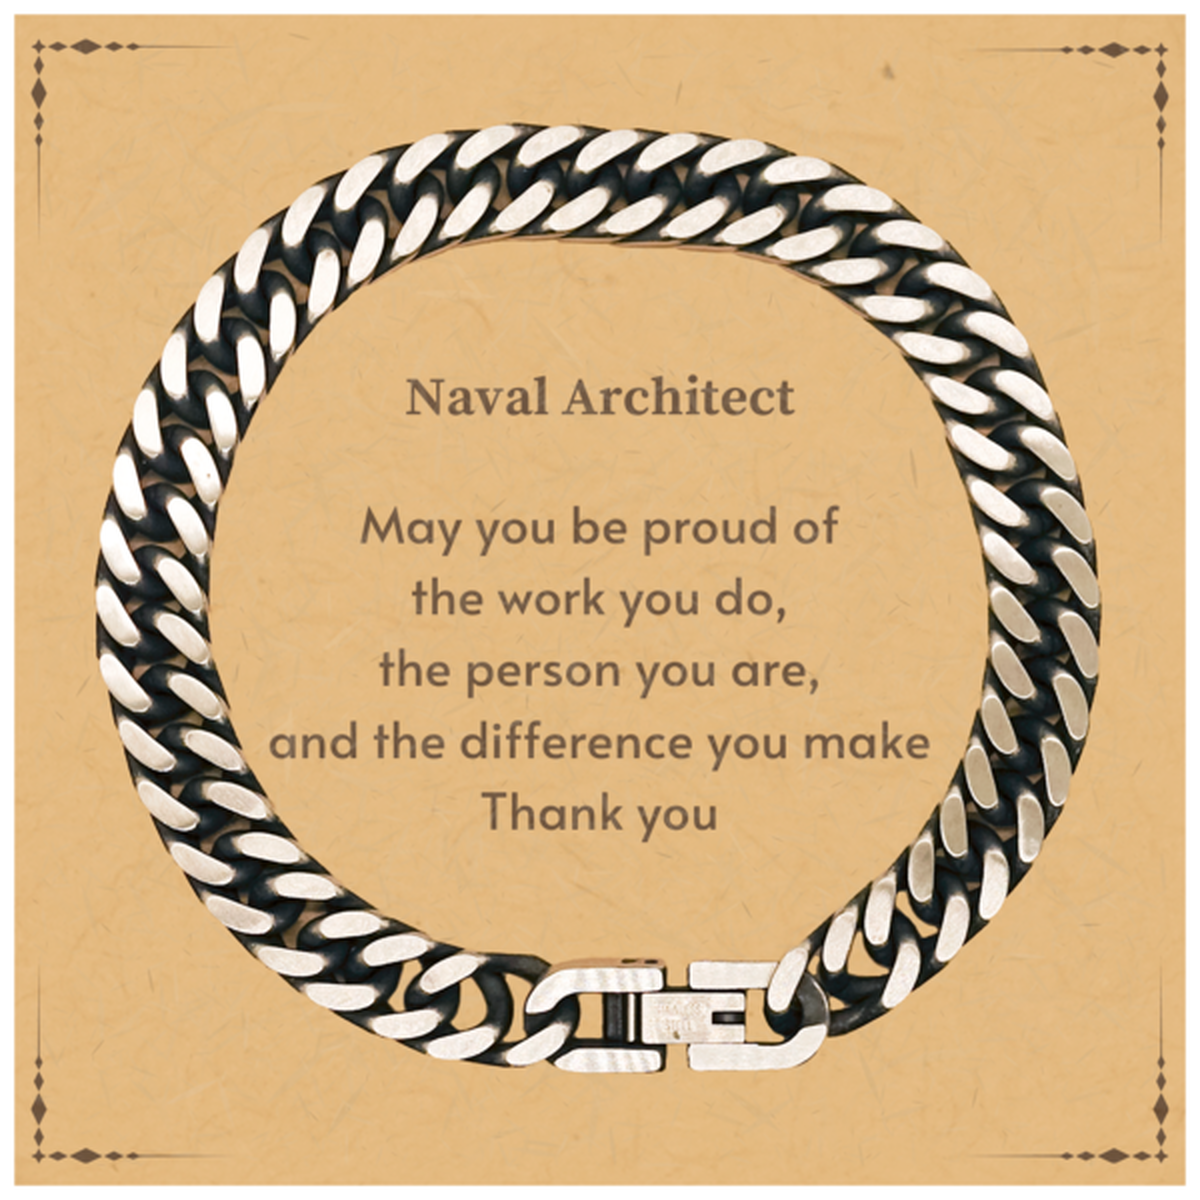 Heartwarming Cuban Link Chain Bracelet Retirement Coworkers Gifts for Naval Architect, Naval Architect May You be proud of the work you do, the person you are Gifts for Boss Men Women Friends